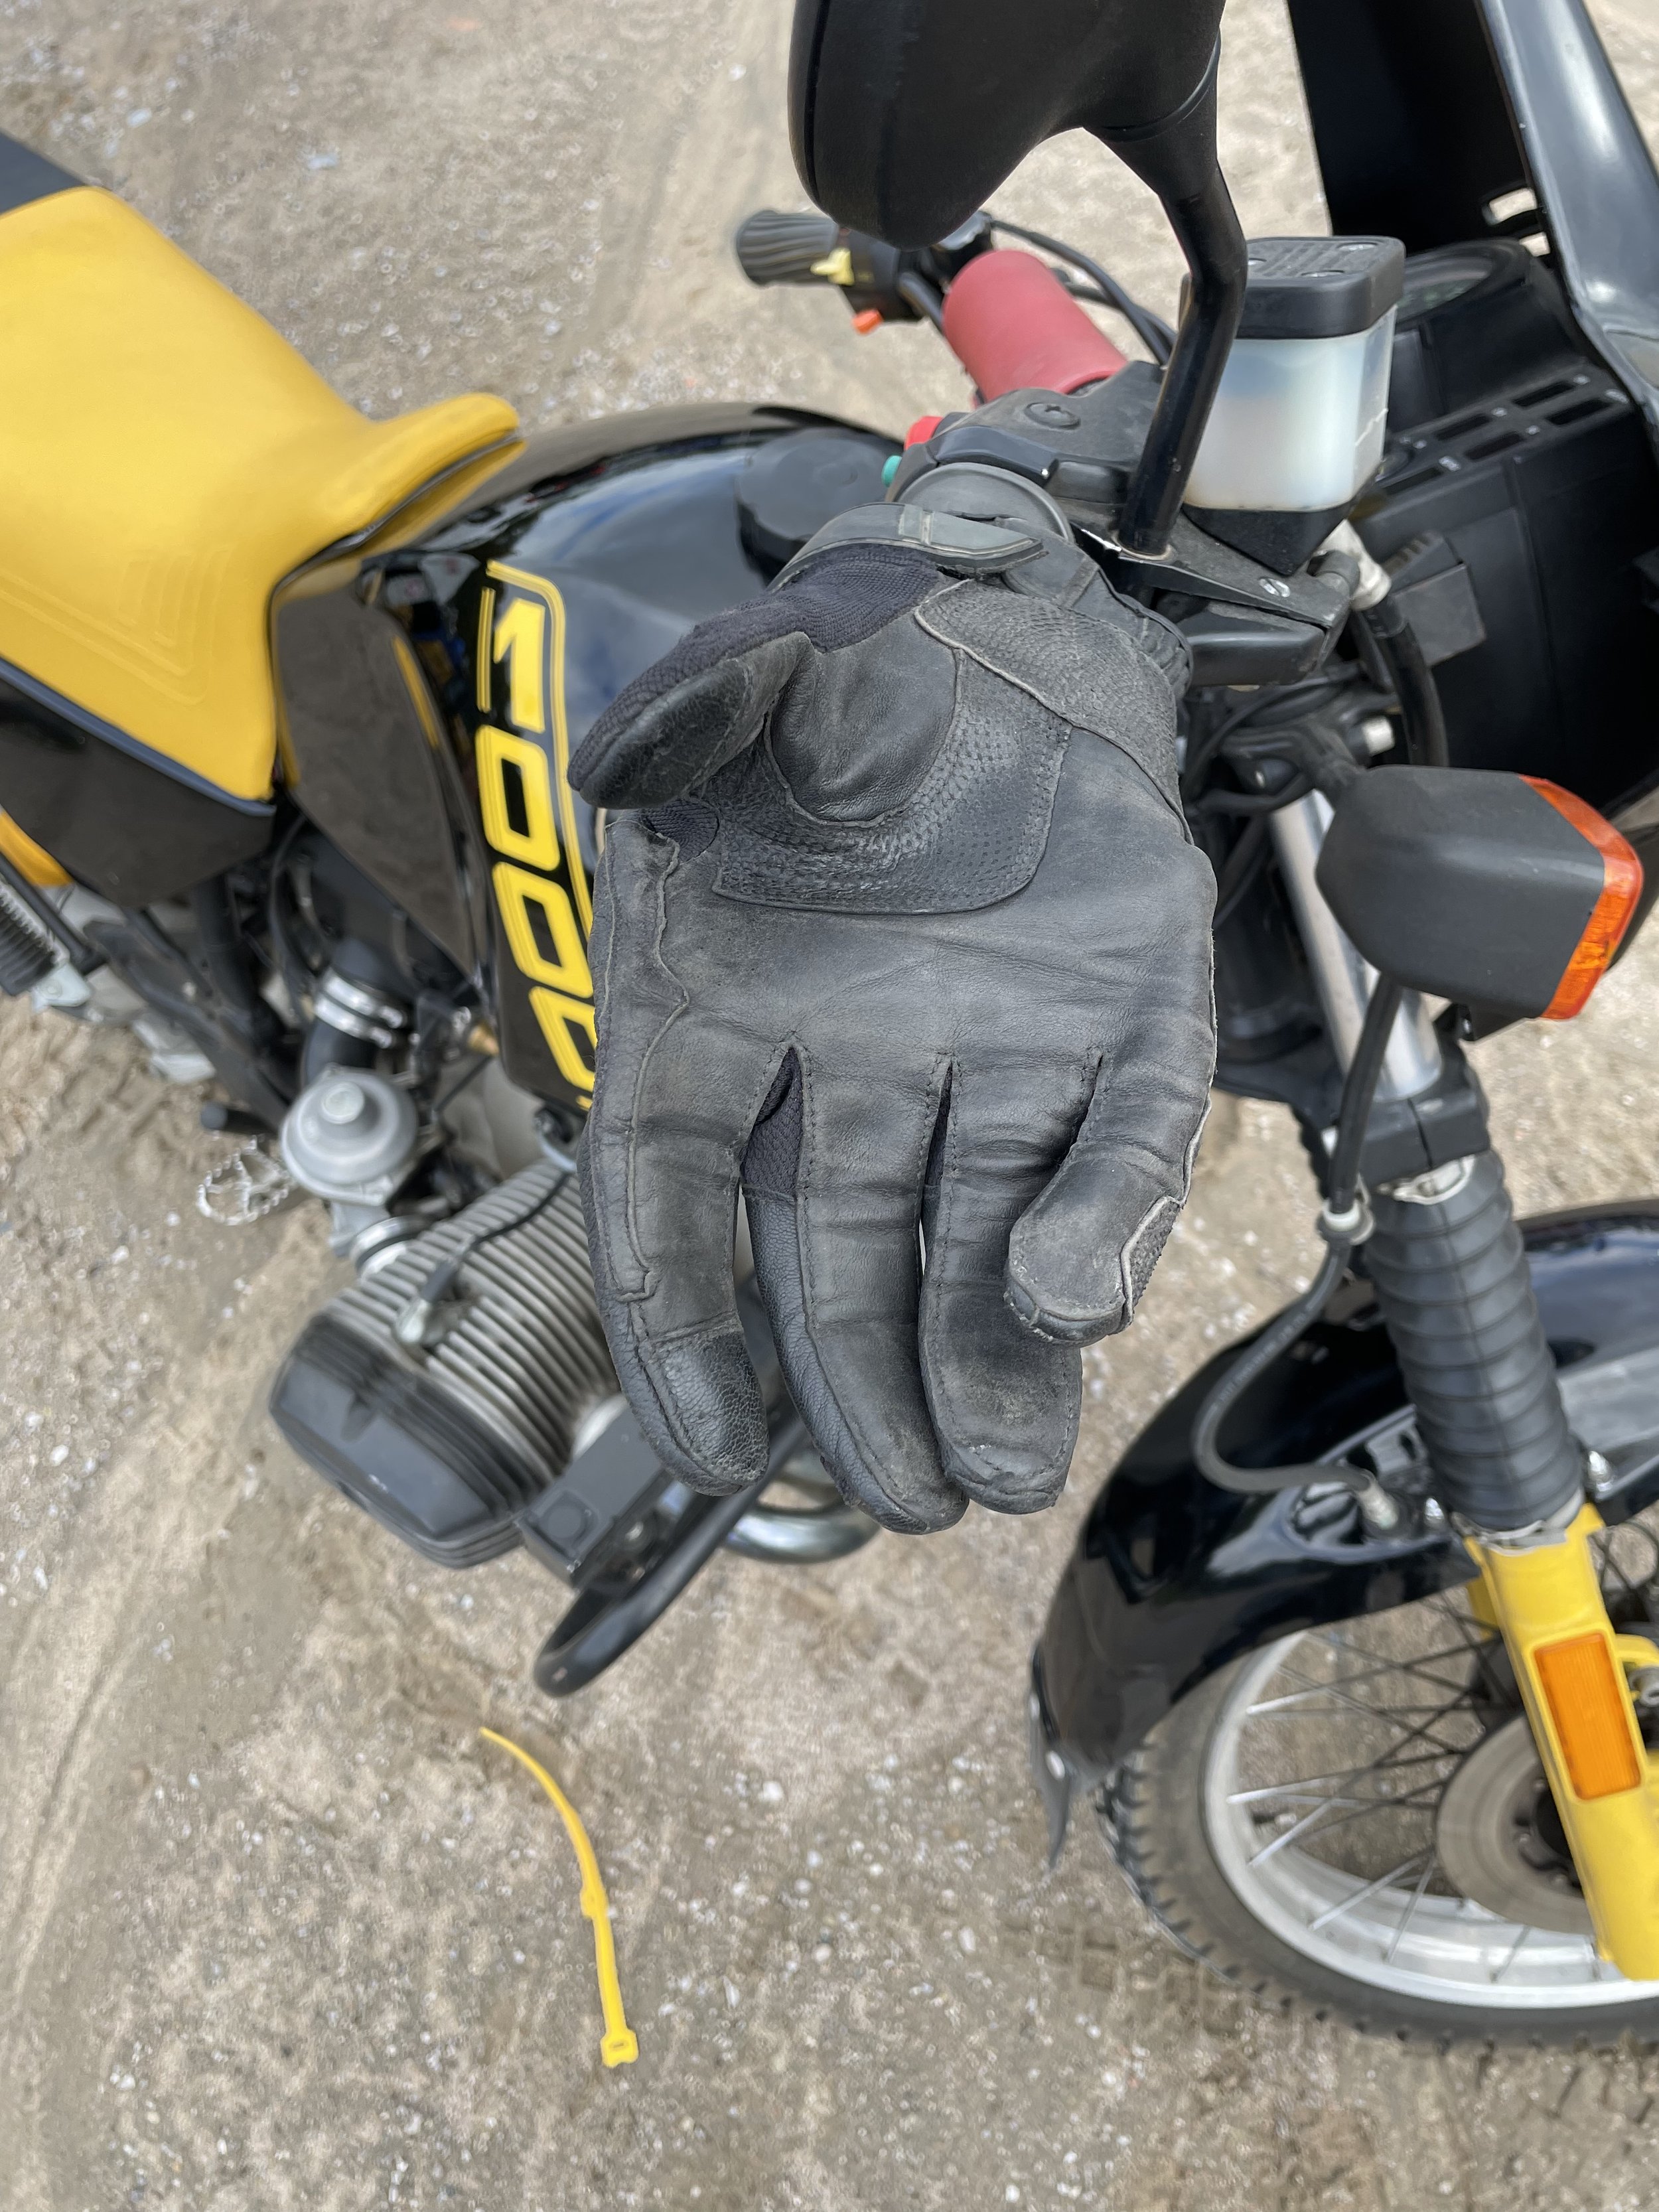  Motorcycle and motorcycle glove. 